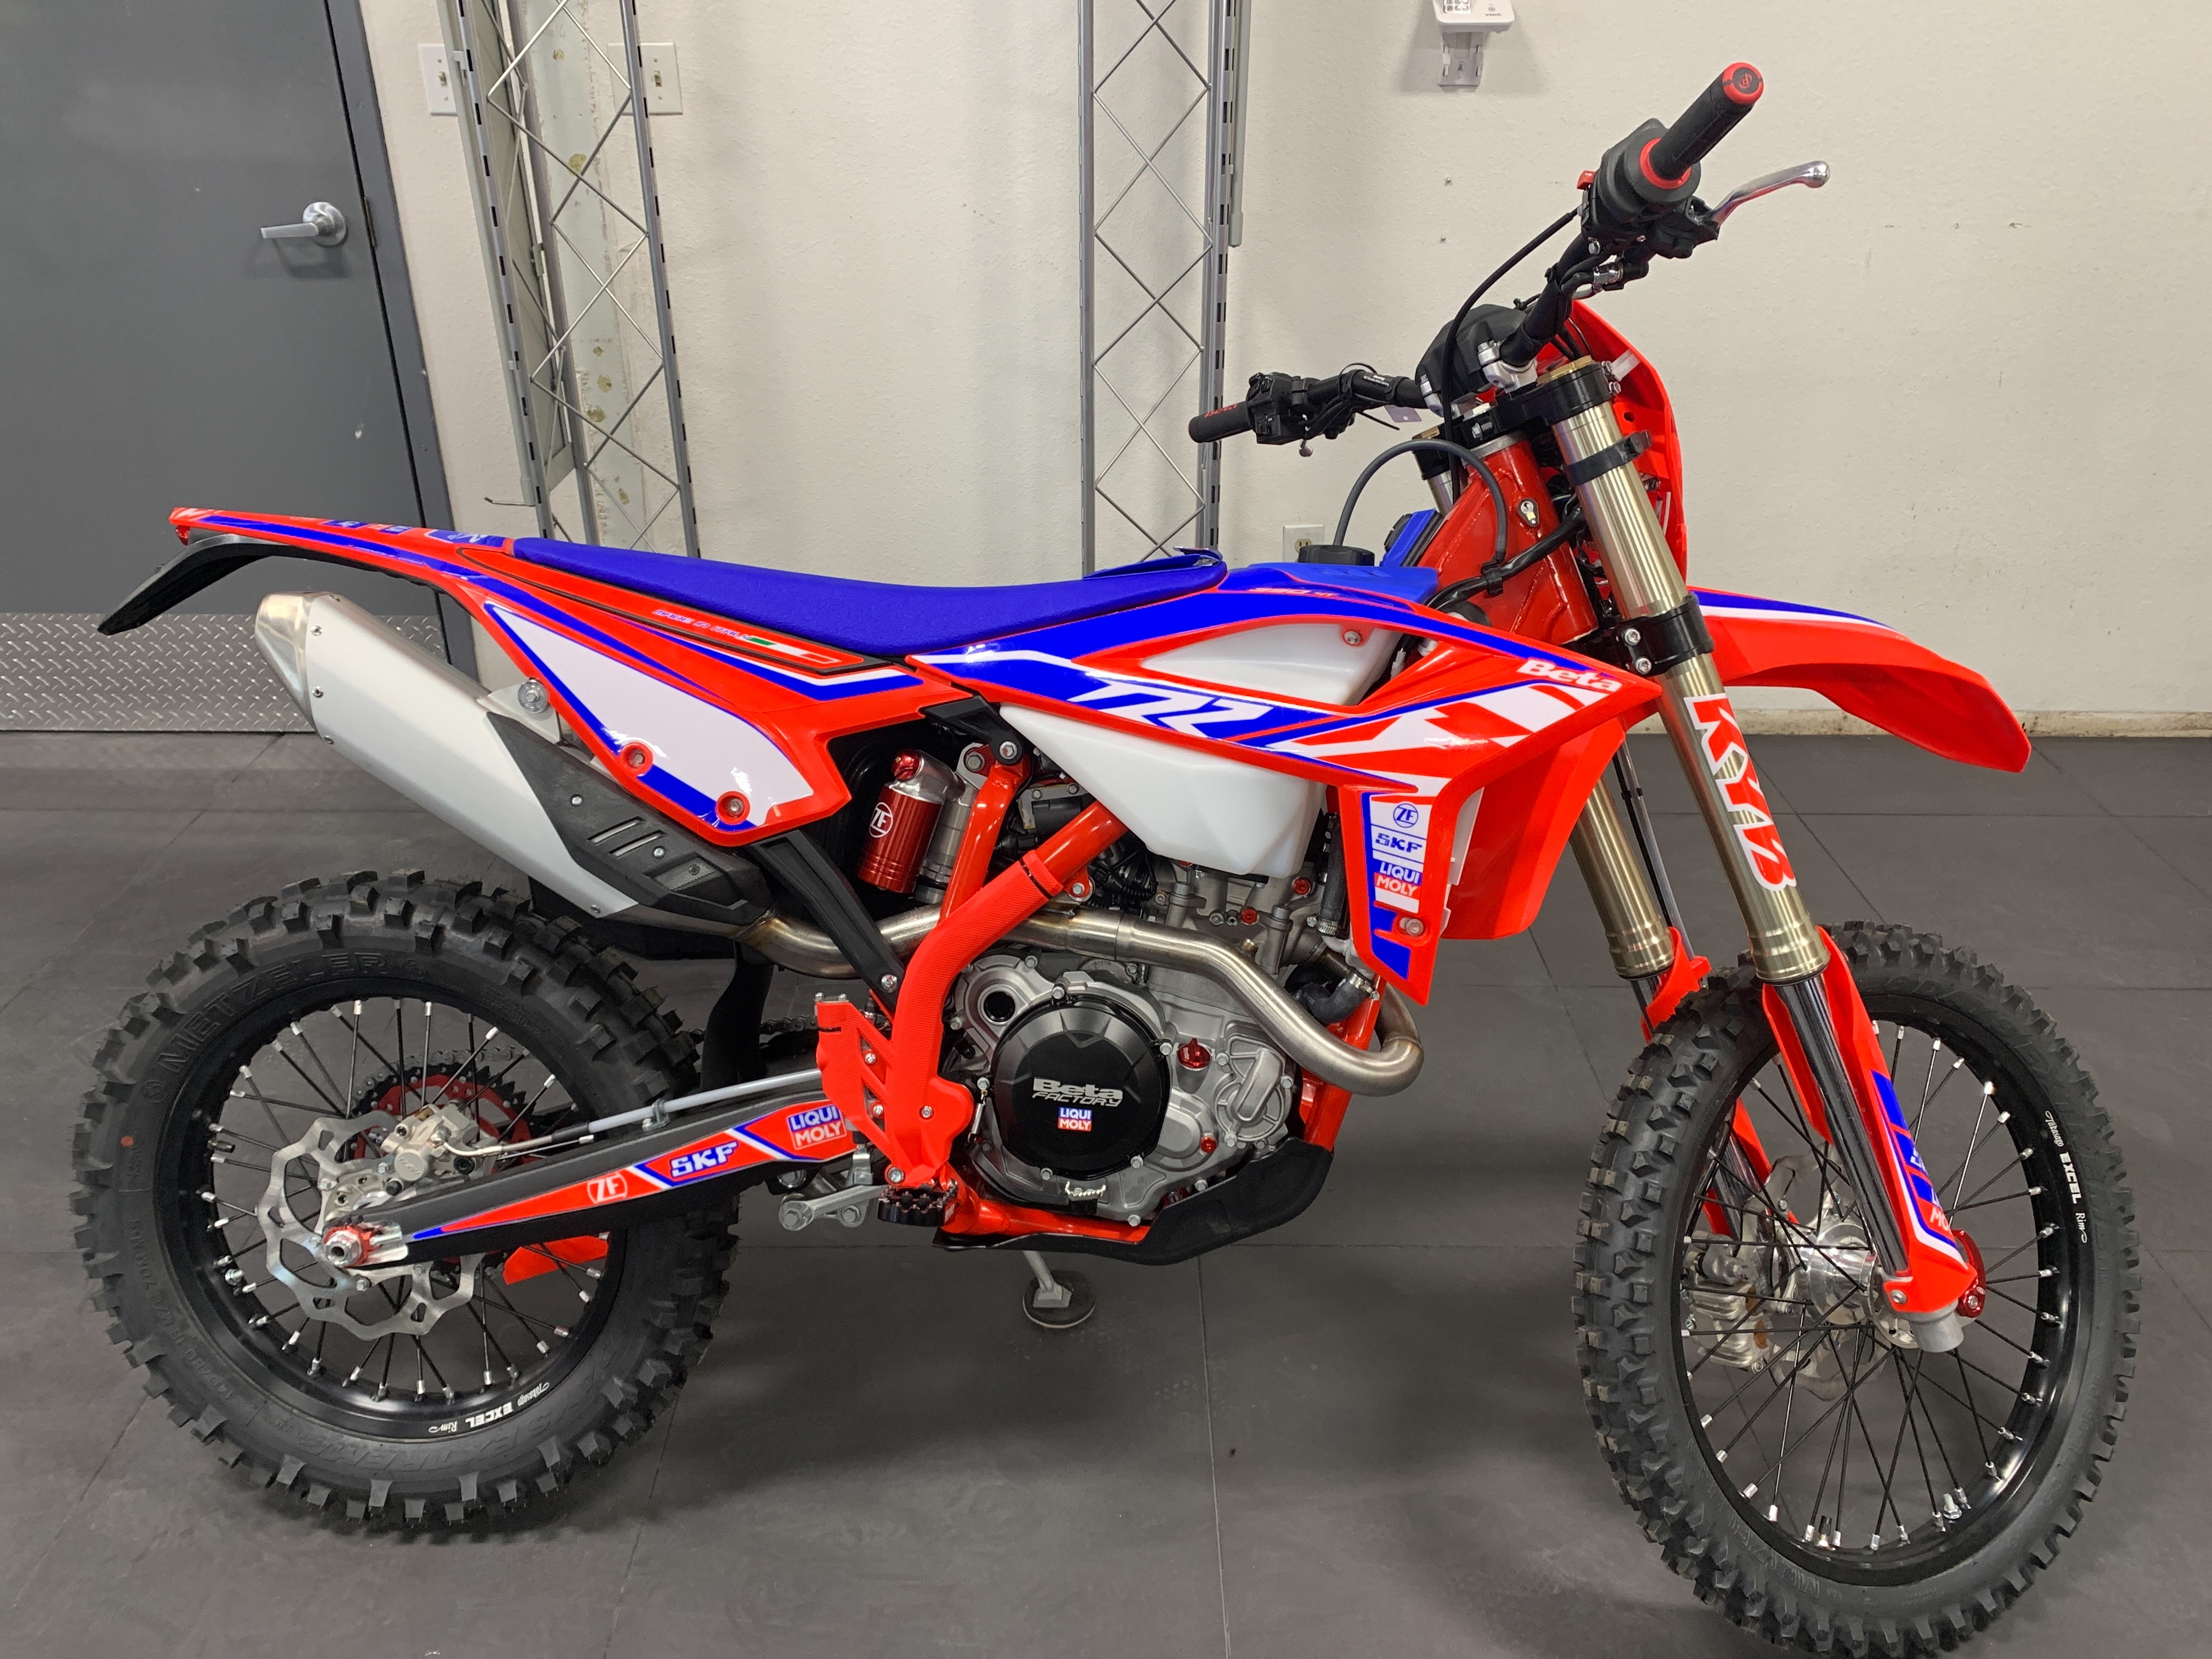 2022 BETA RR Race Edition 390 at Perri's Powersports